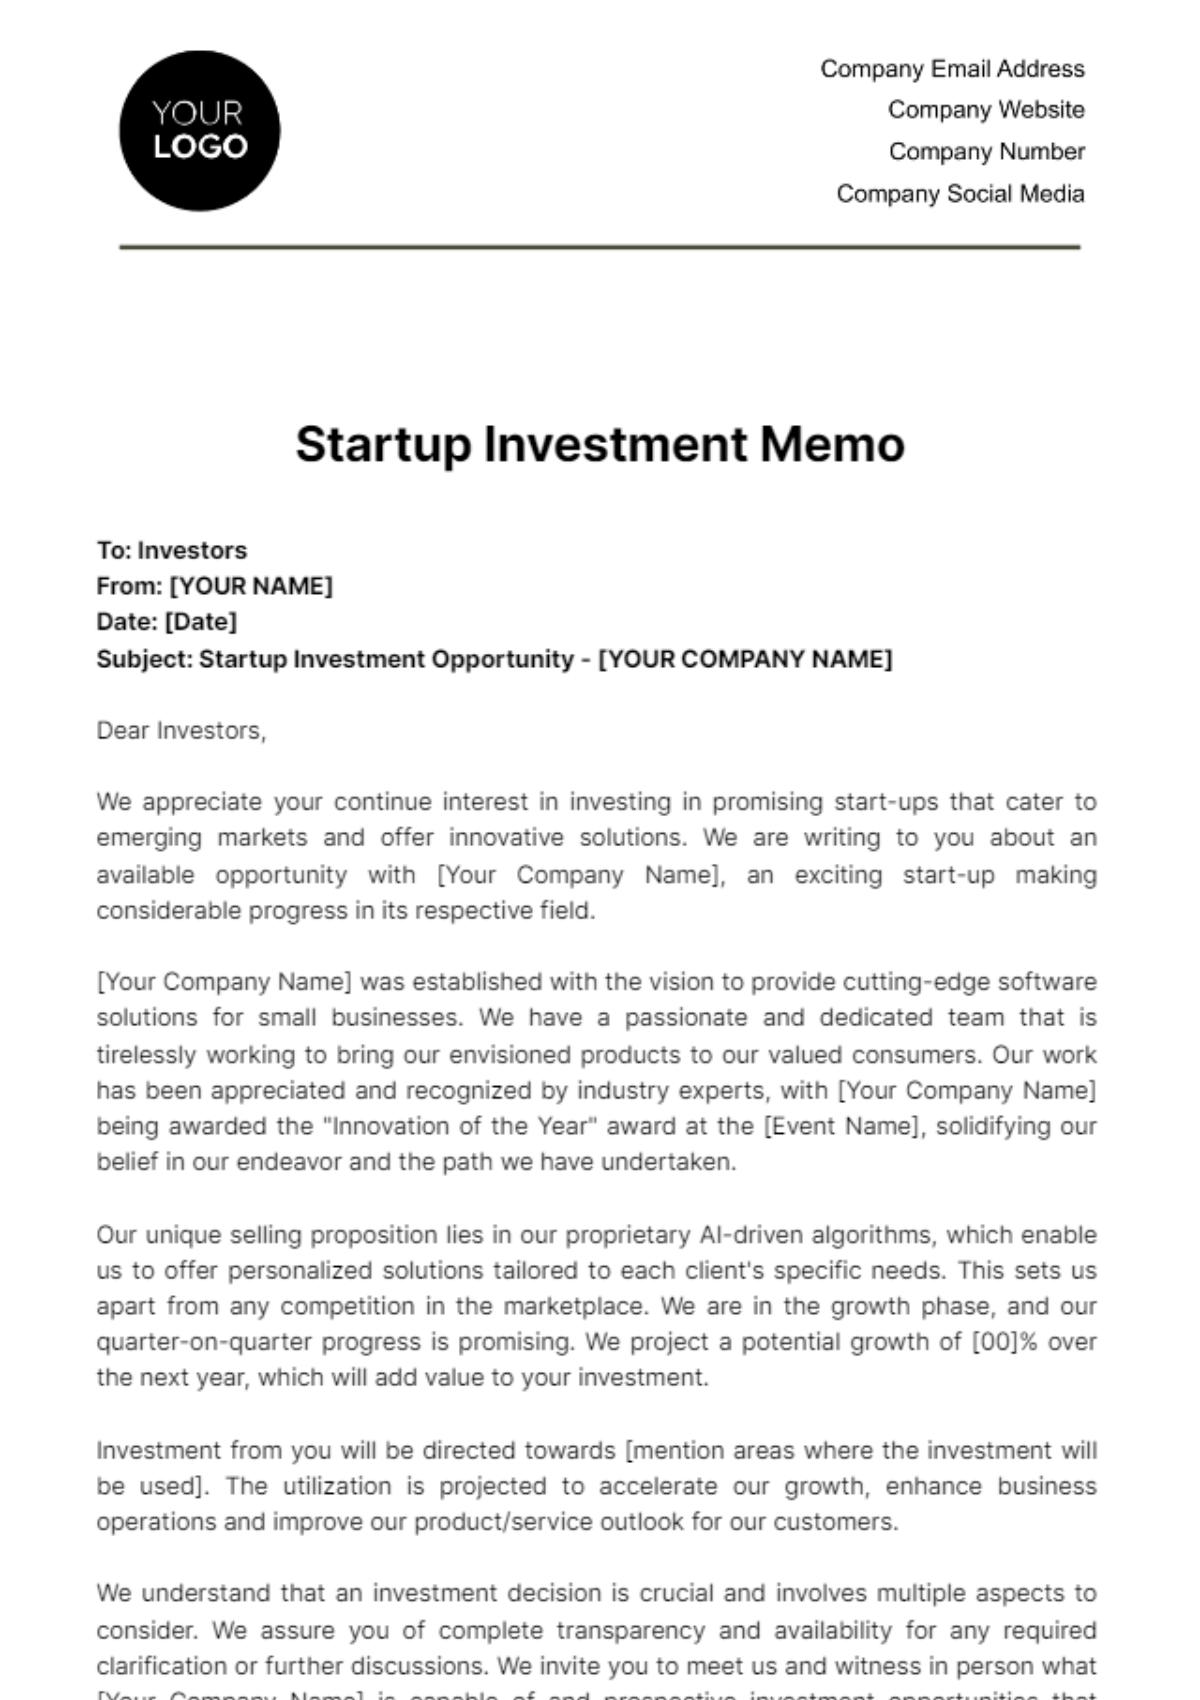 Free Startup Investment Memo Template